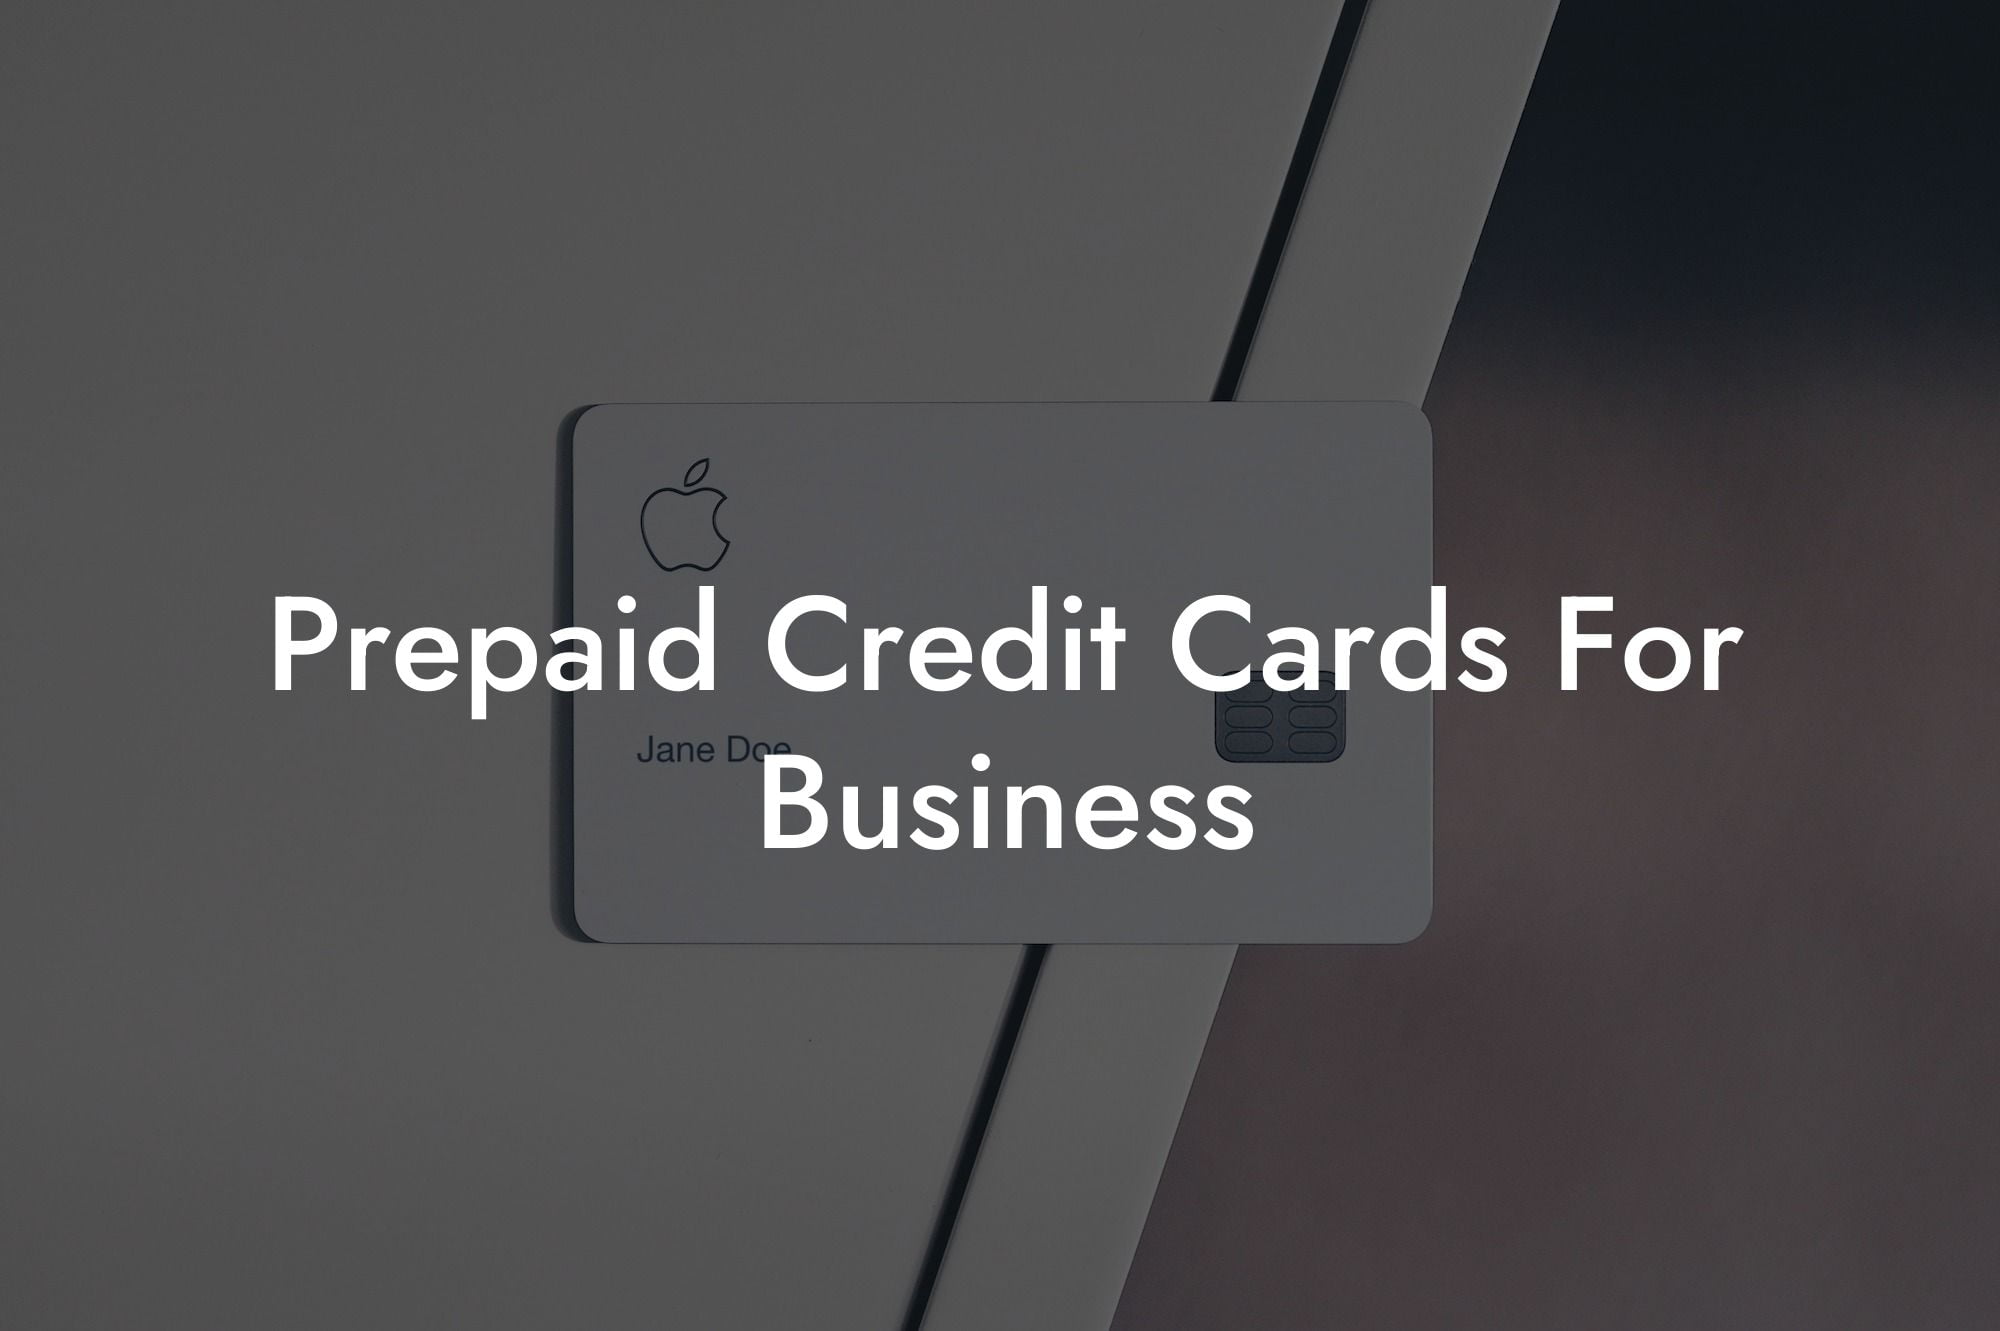 Prepaid Credit Cards For Business